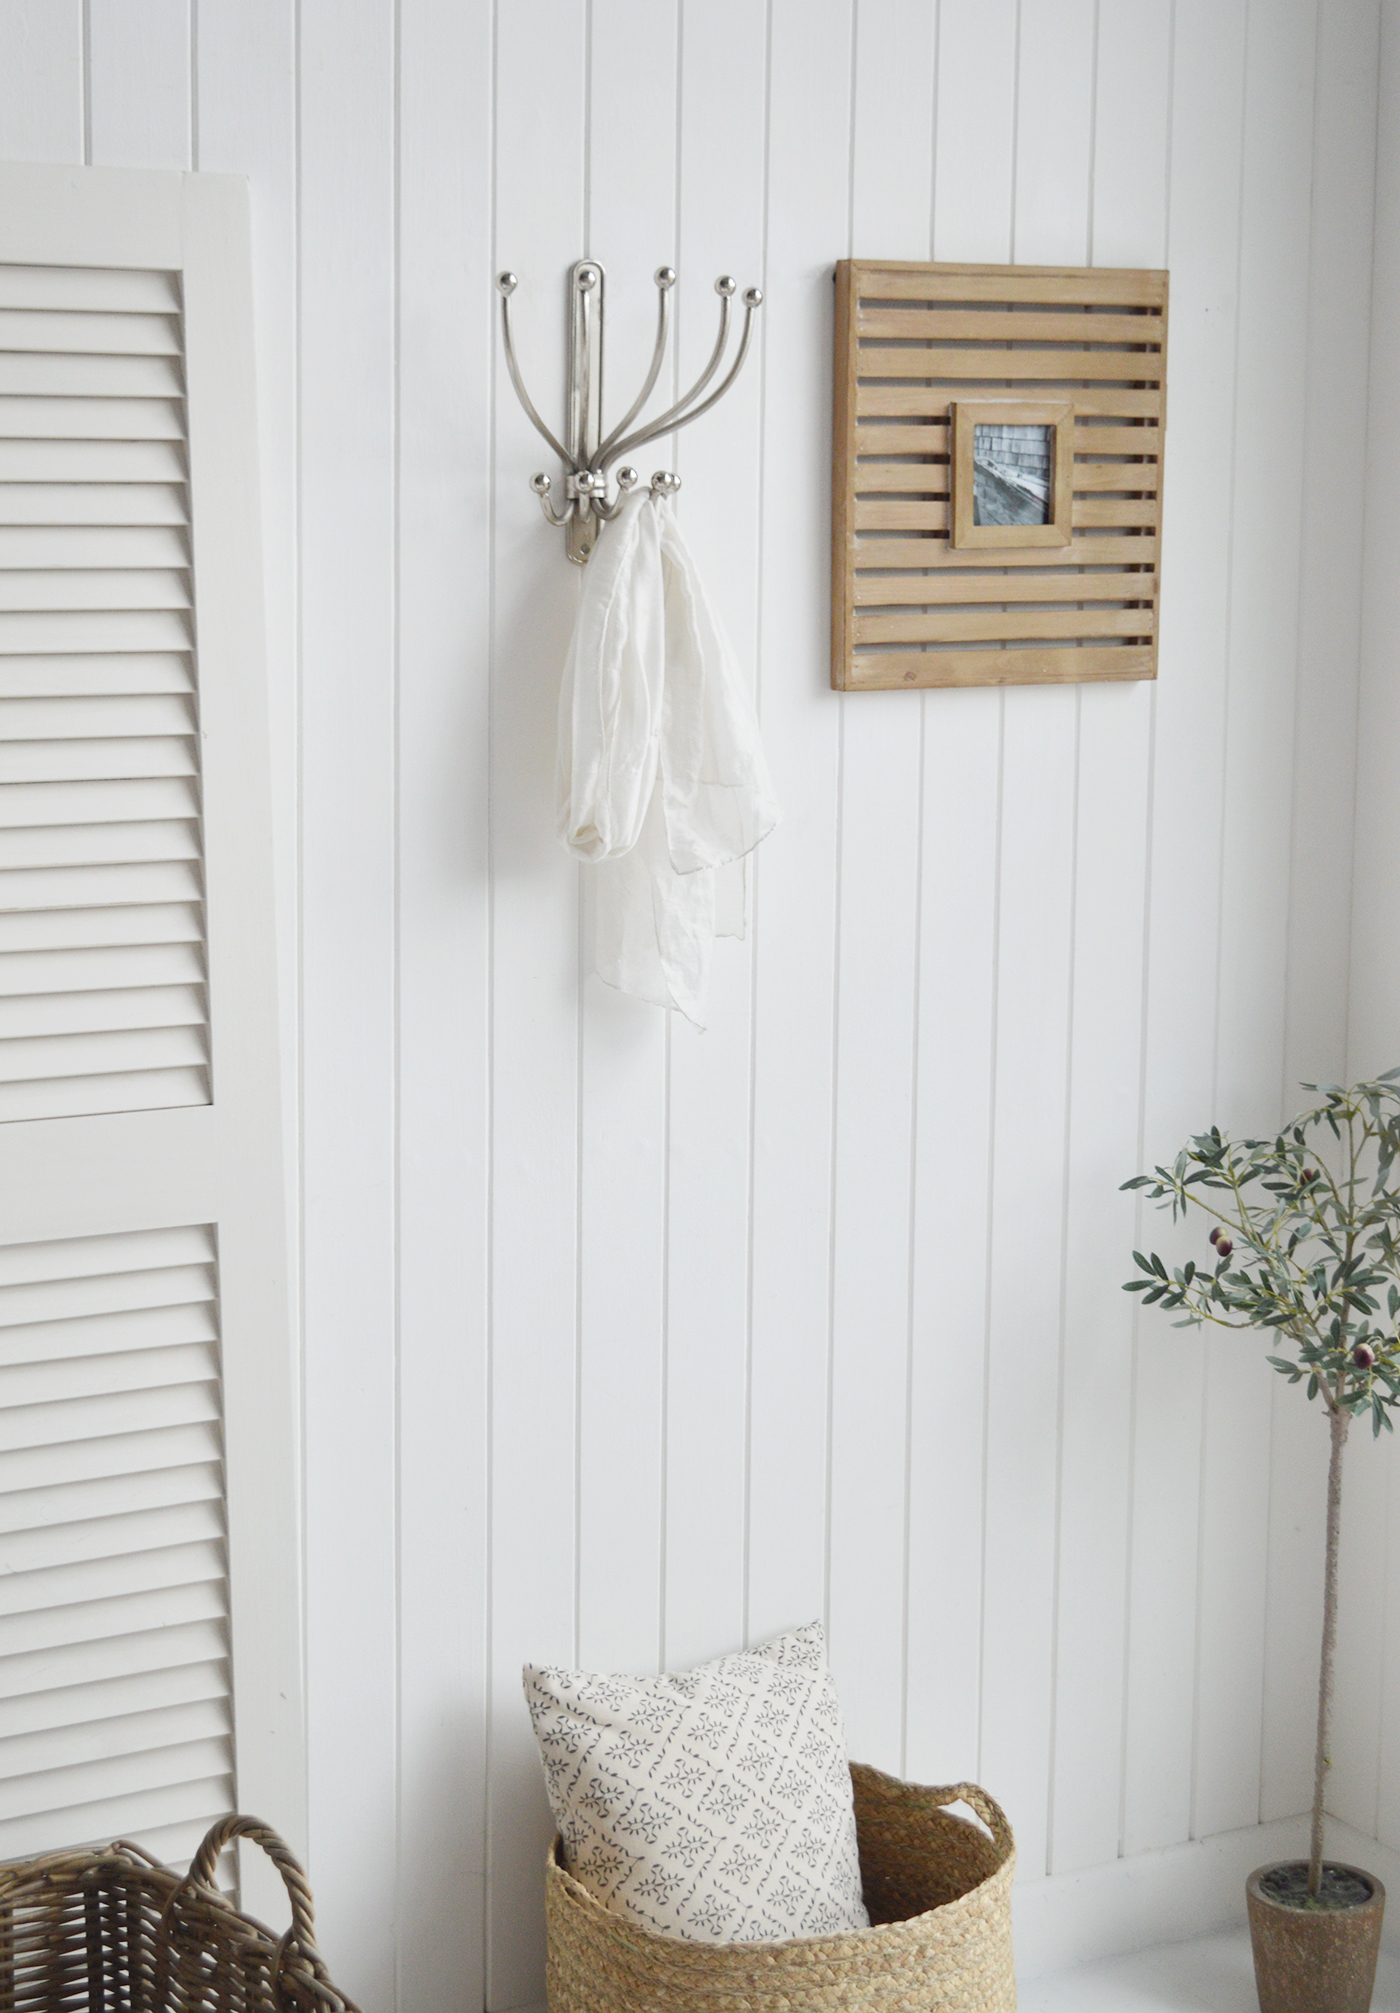 Silver Coat Rack - New England Hallway Furniture for coastal, country and modern farmhouse styled homes and interiors